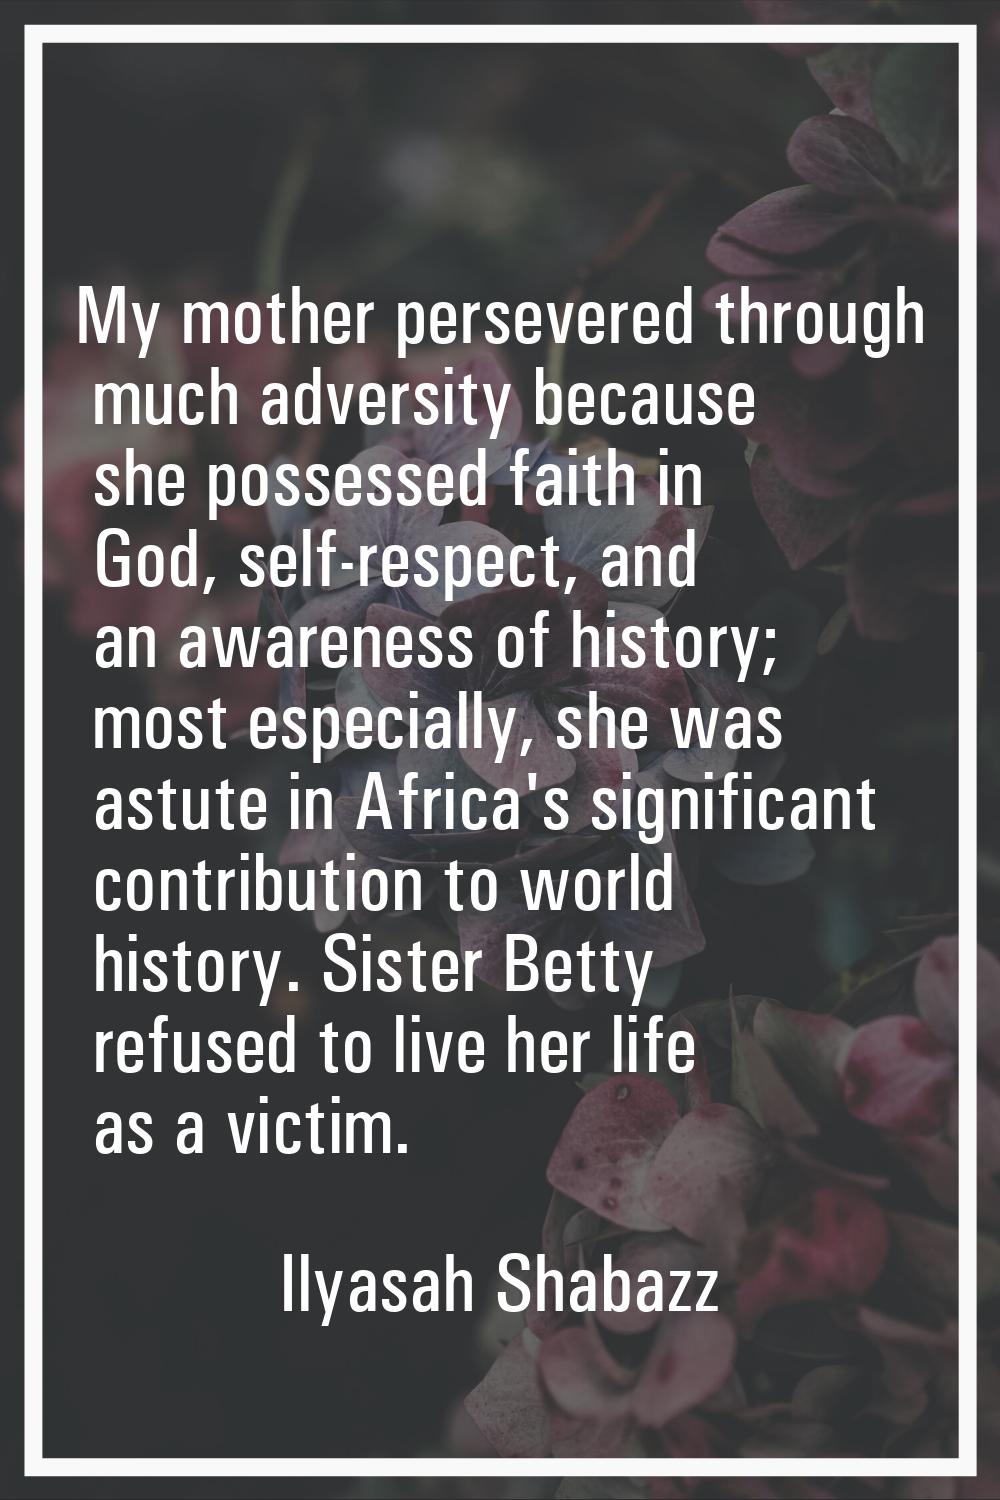 My mother persevered through much adversity because she possessed faith in God, self-respect, and a